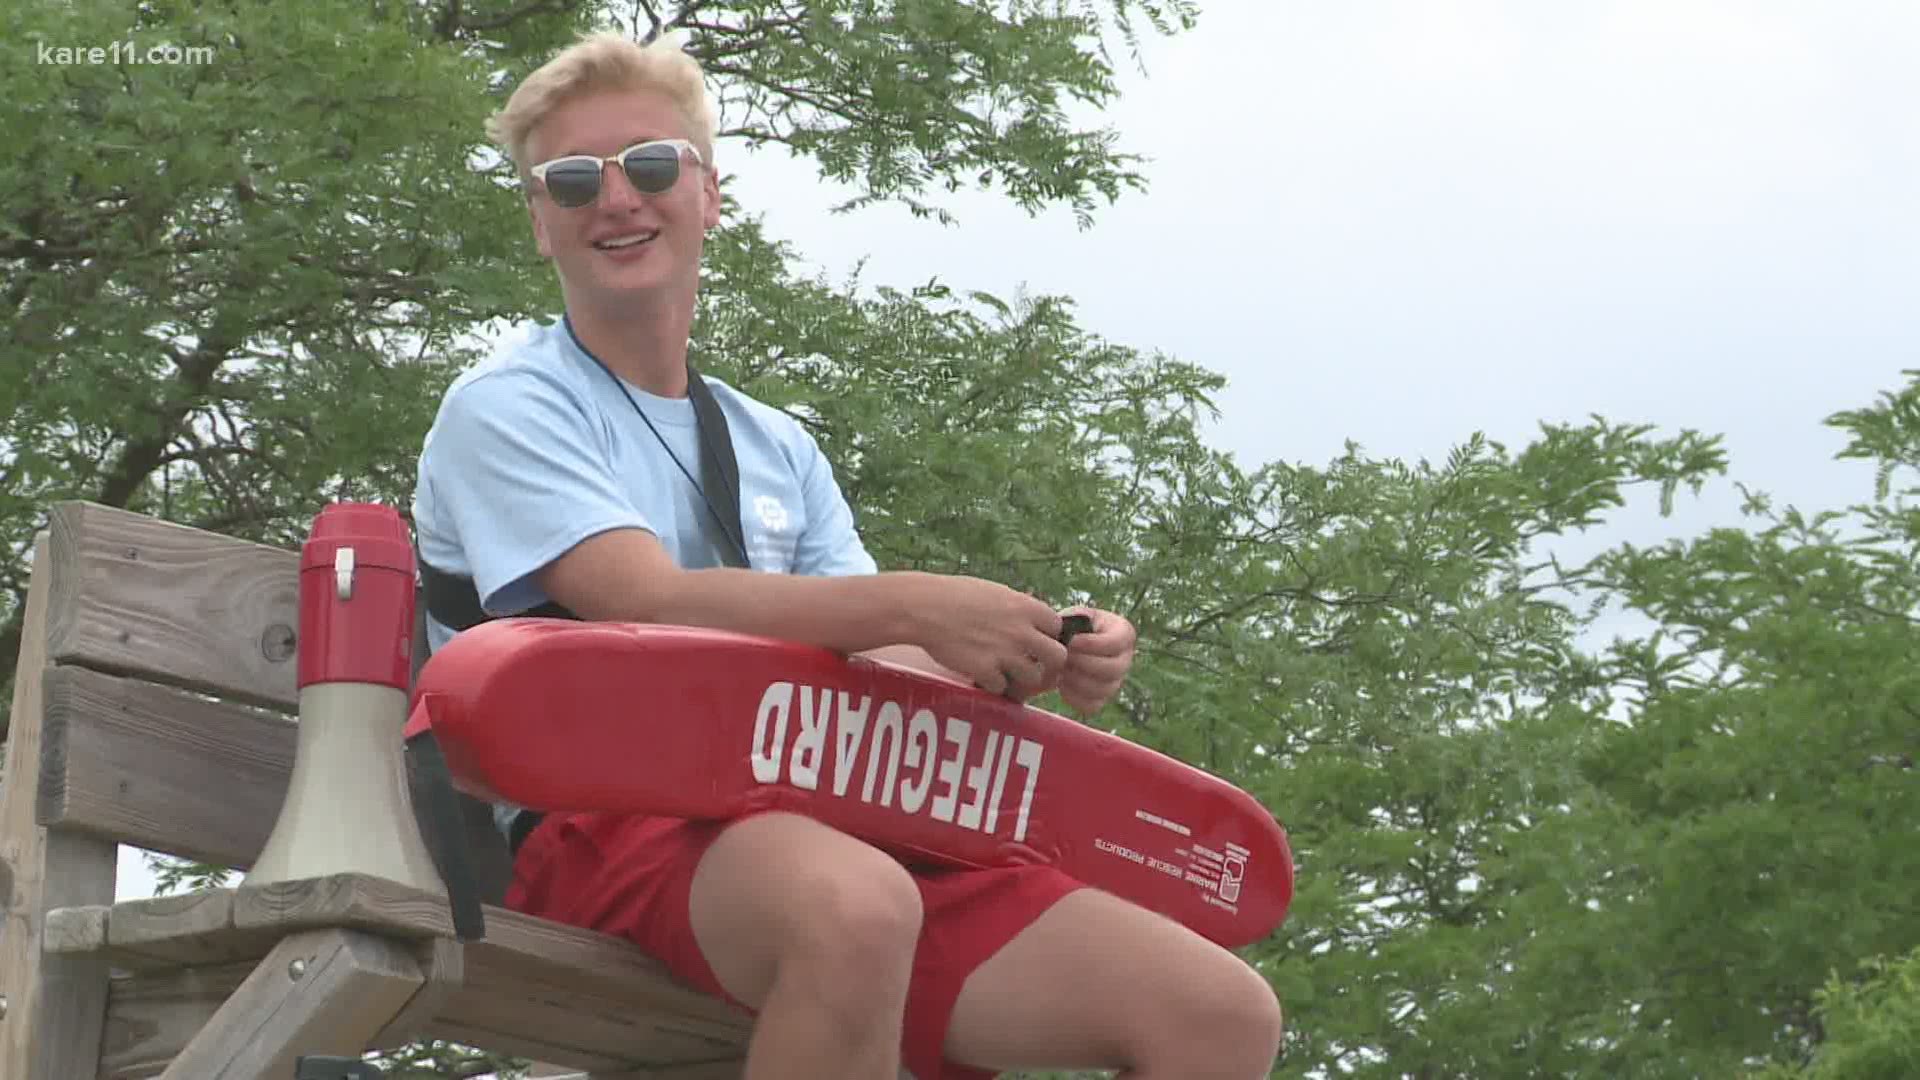 Starting on June 20, there will be a lifeguard on duty every Saturday and Sunday from 12 p.m. - 7 p.m. at the three most popular beaches.